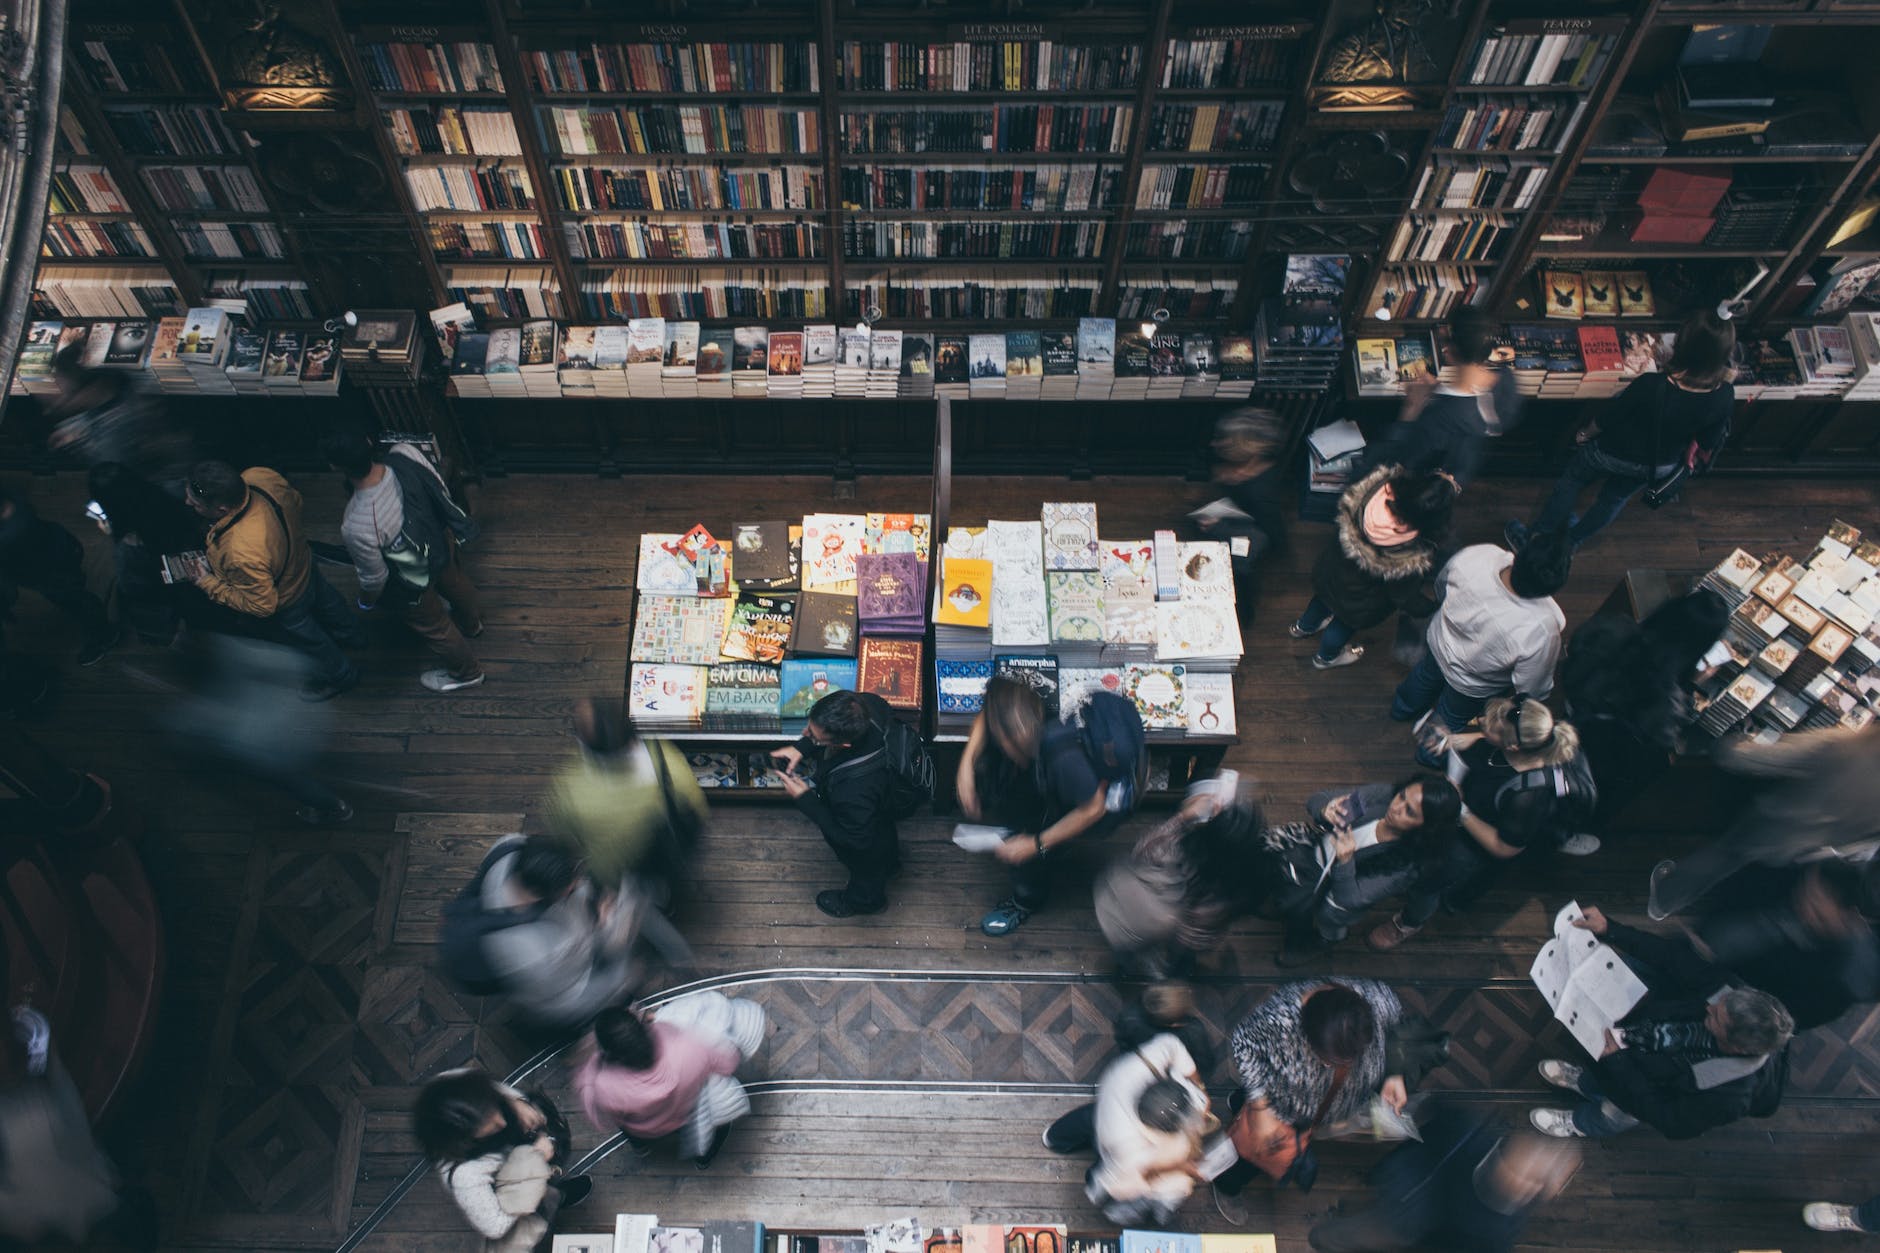 crowd of people in bookstore